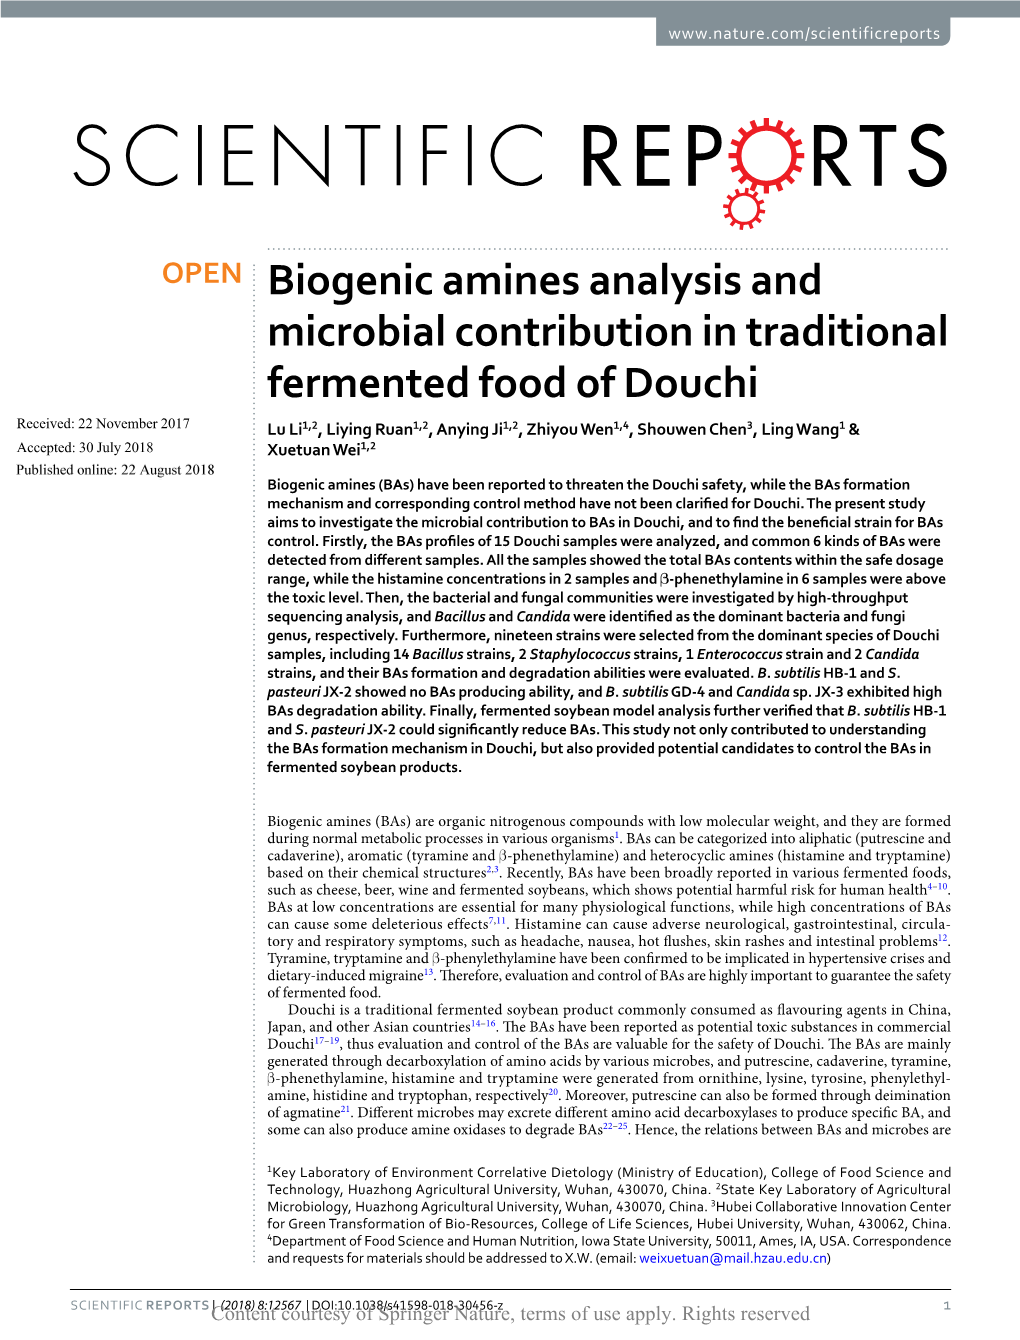 Biogenic Amines Analysis and Microbial Contribution in Traditional